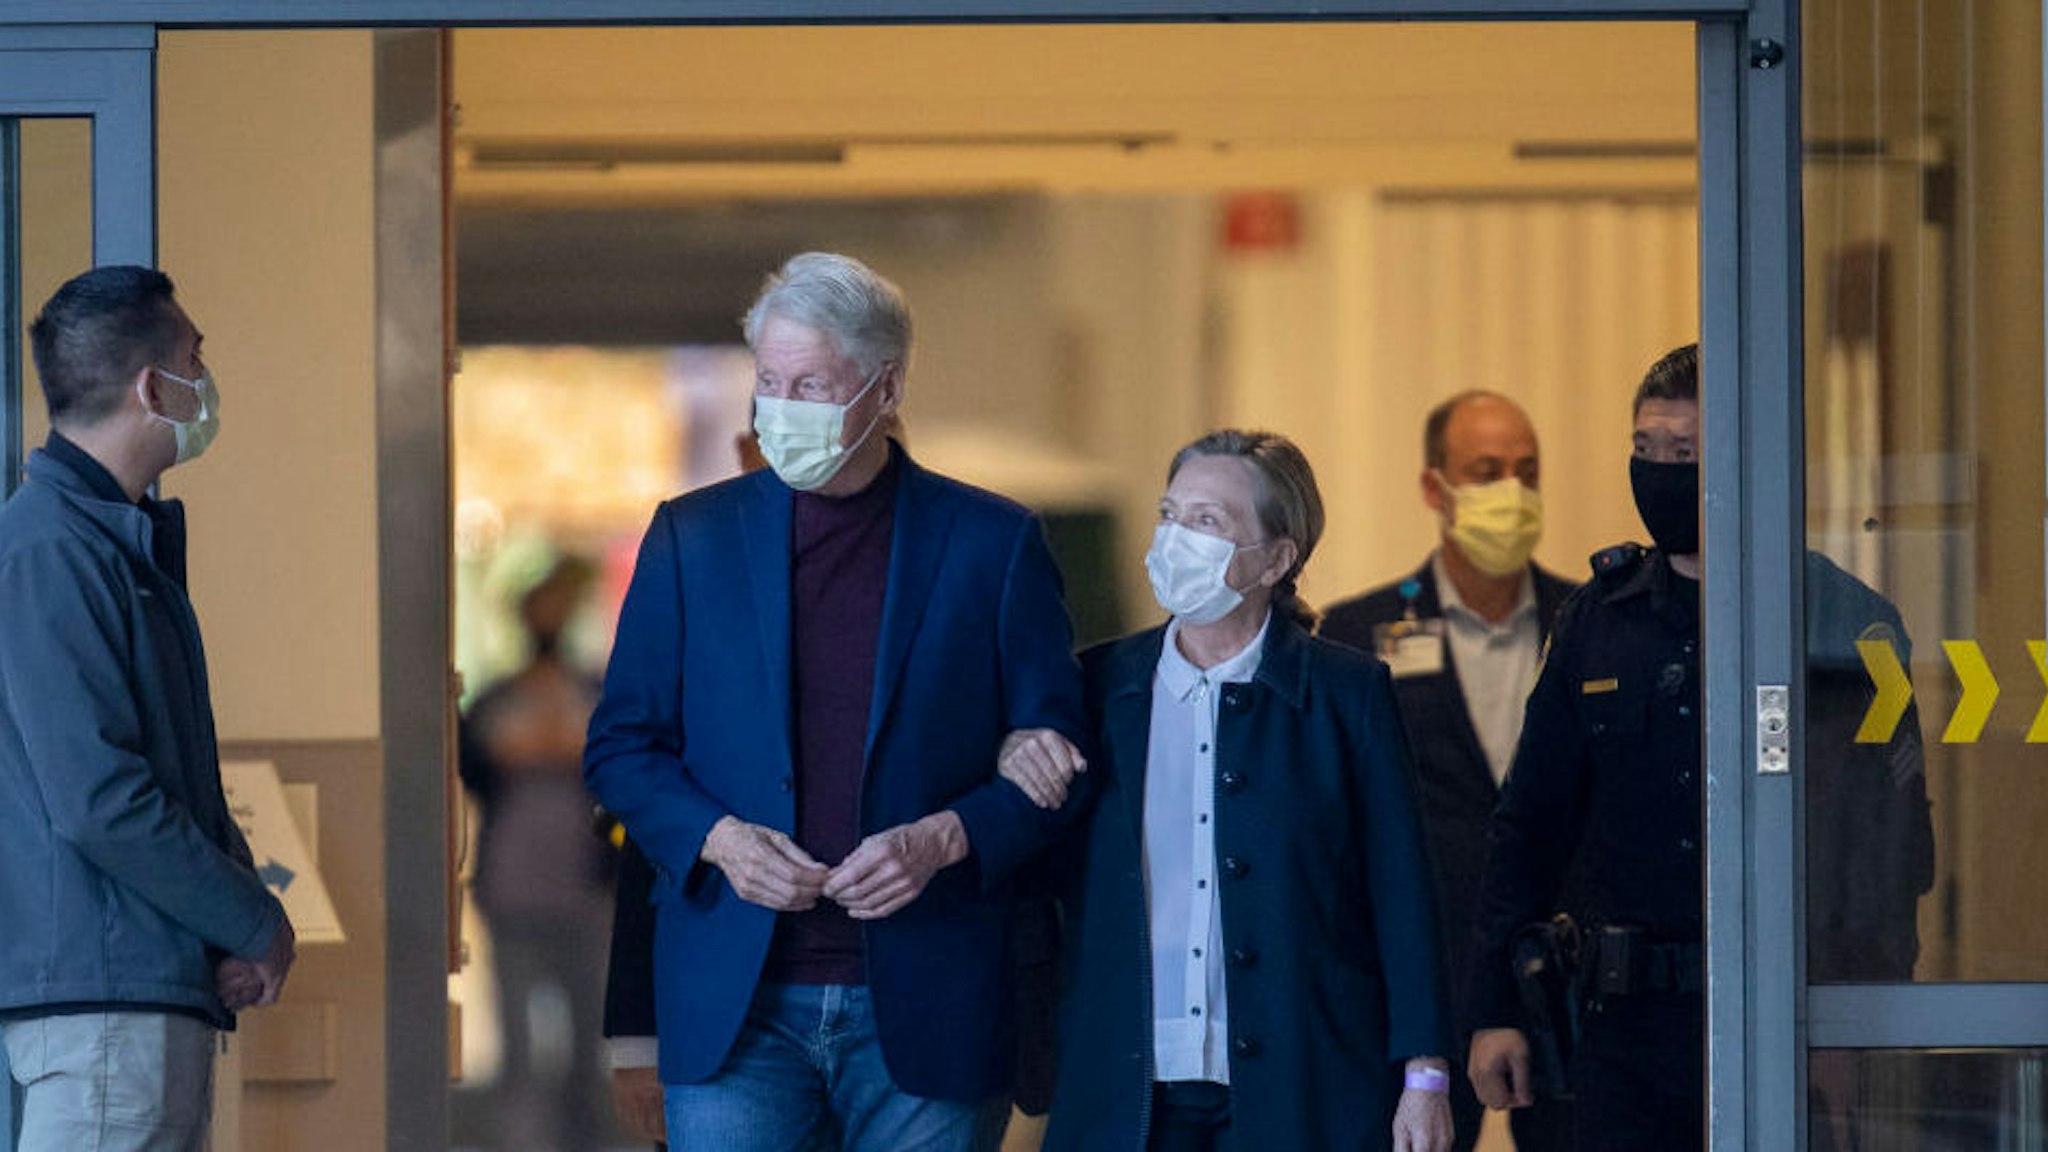 Orange, CA - October 17: Former President Bill Clinton exits the hospital with former First Lady and former U.S. Secretary of State Hillary Clinton after being discharged from the University of California-Irvine Medical Center in Orange where he spent six days fighting an infection Sunday, Oct. 17, 2021.